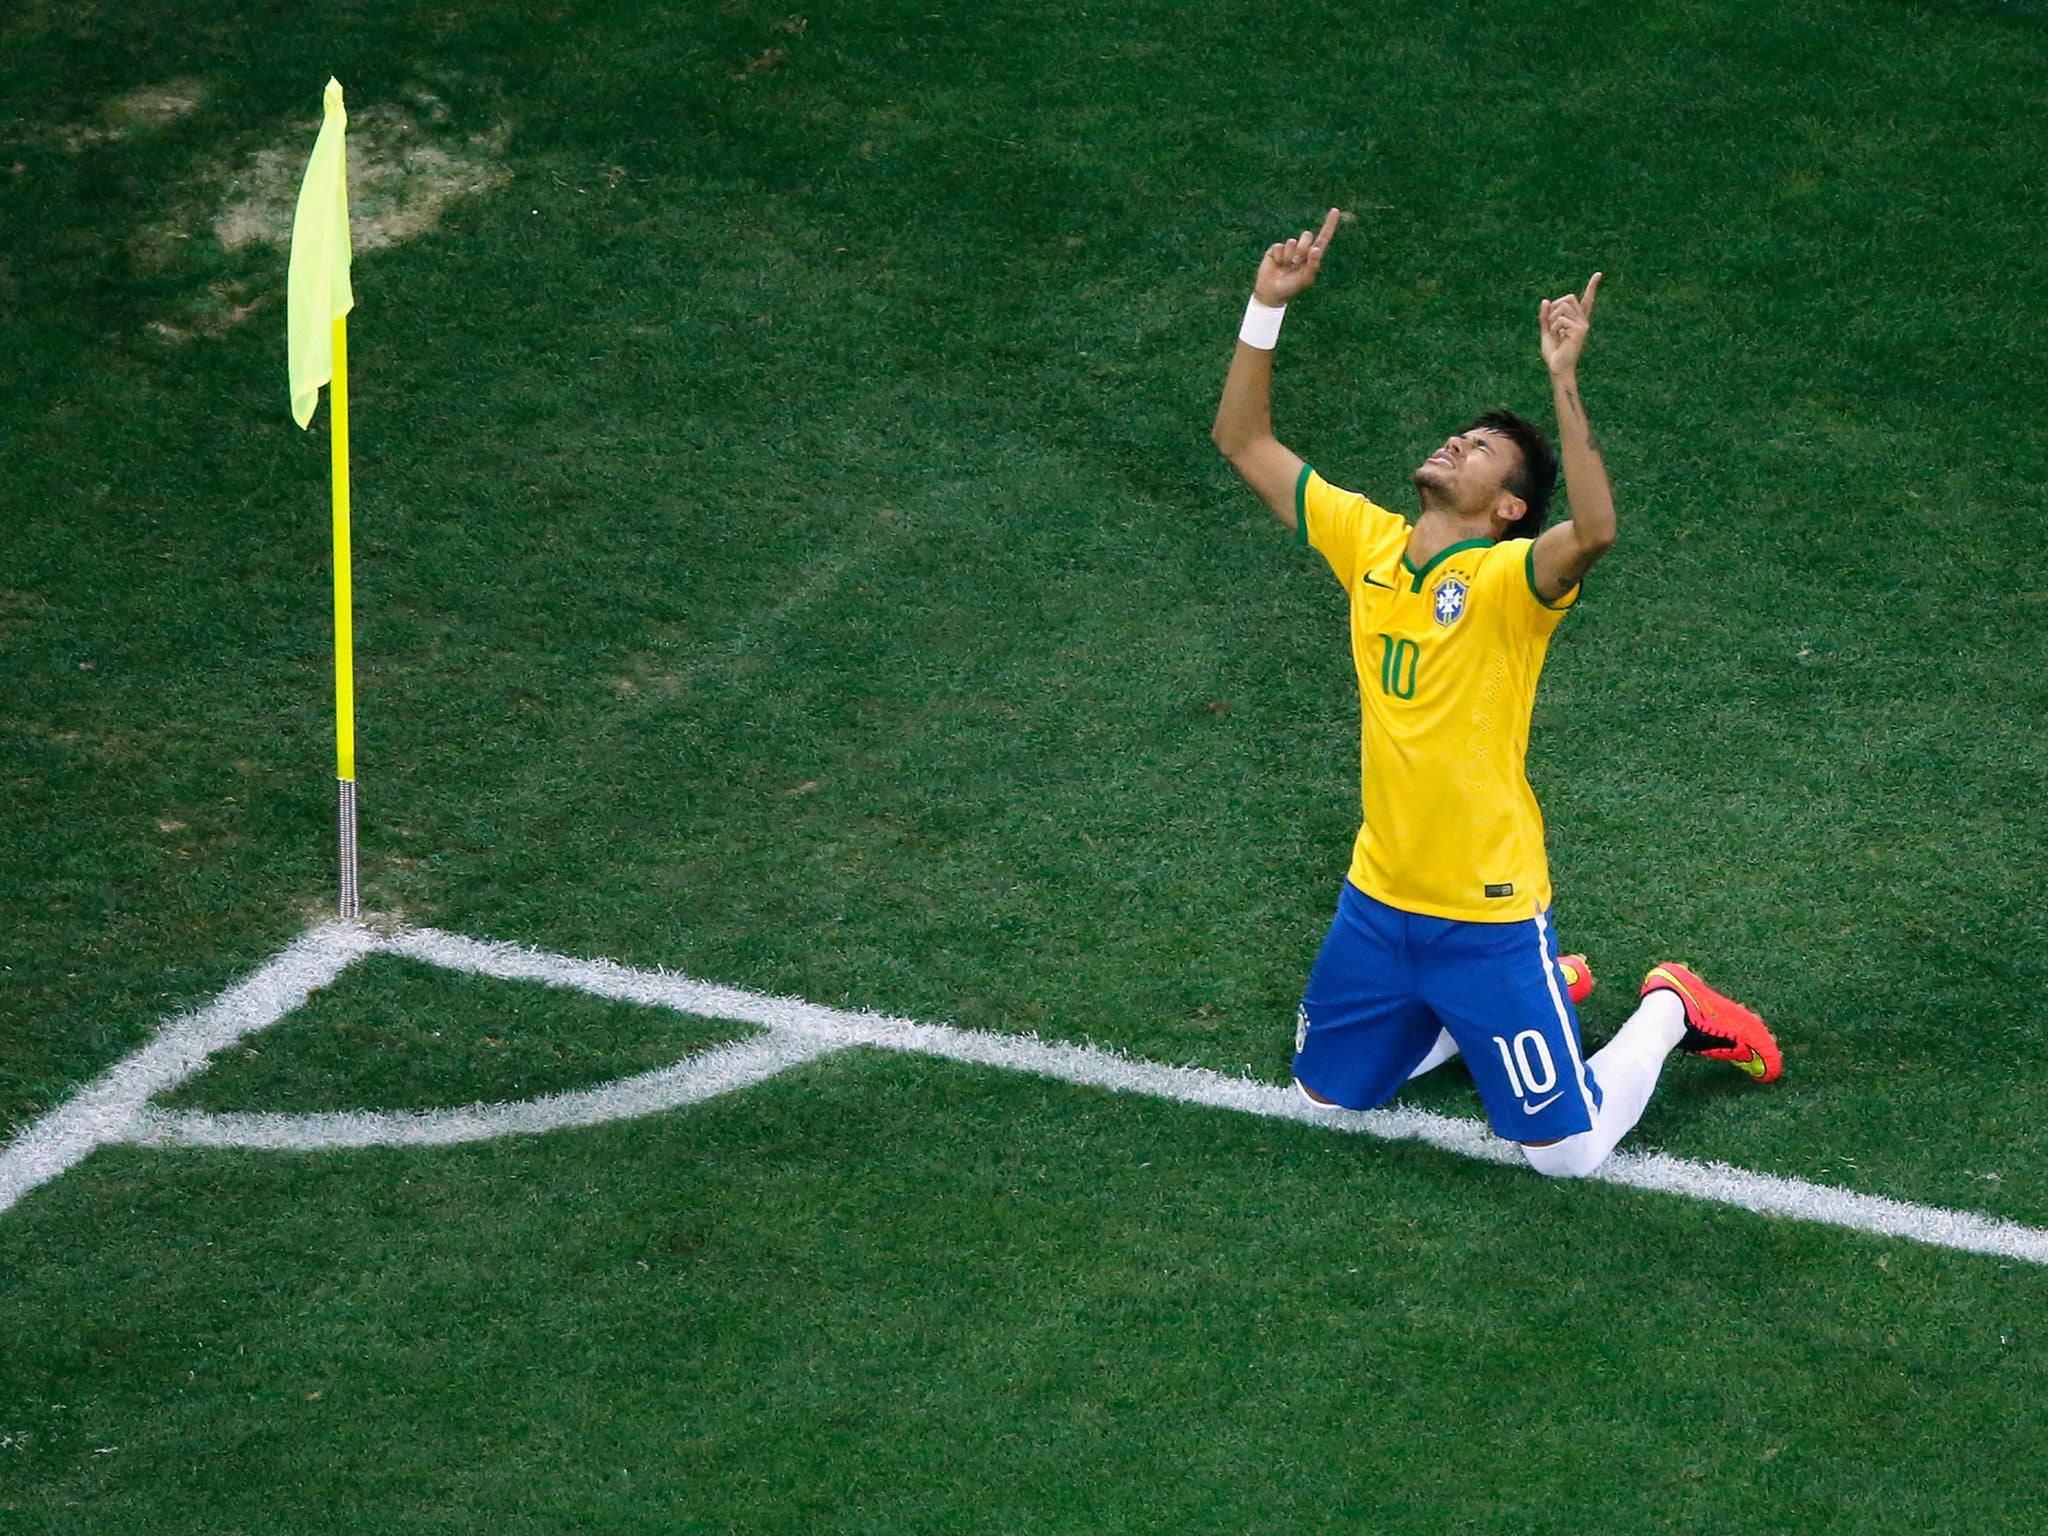 Neymar said he enjoyed a 'dream' start to the tournament after scoring twice